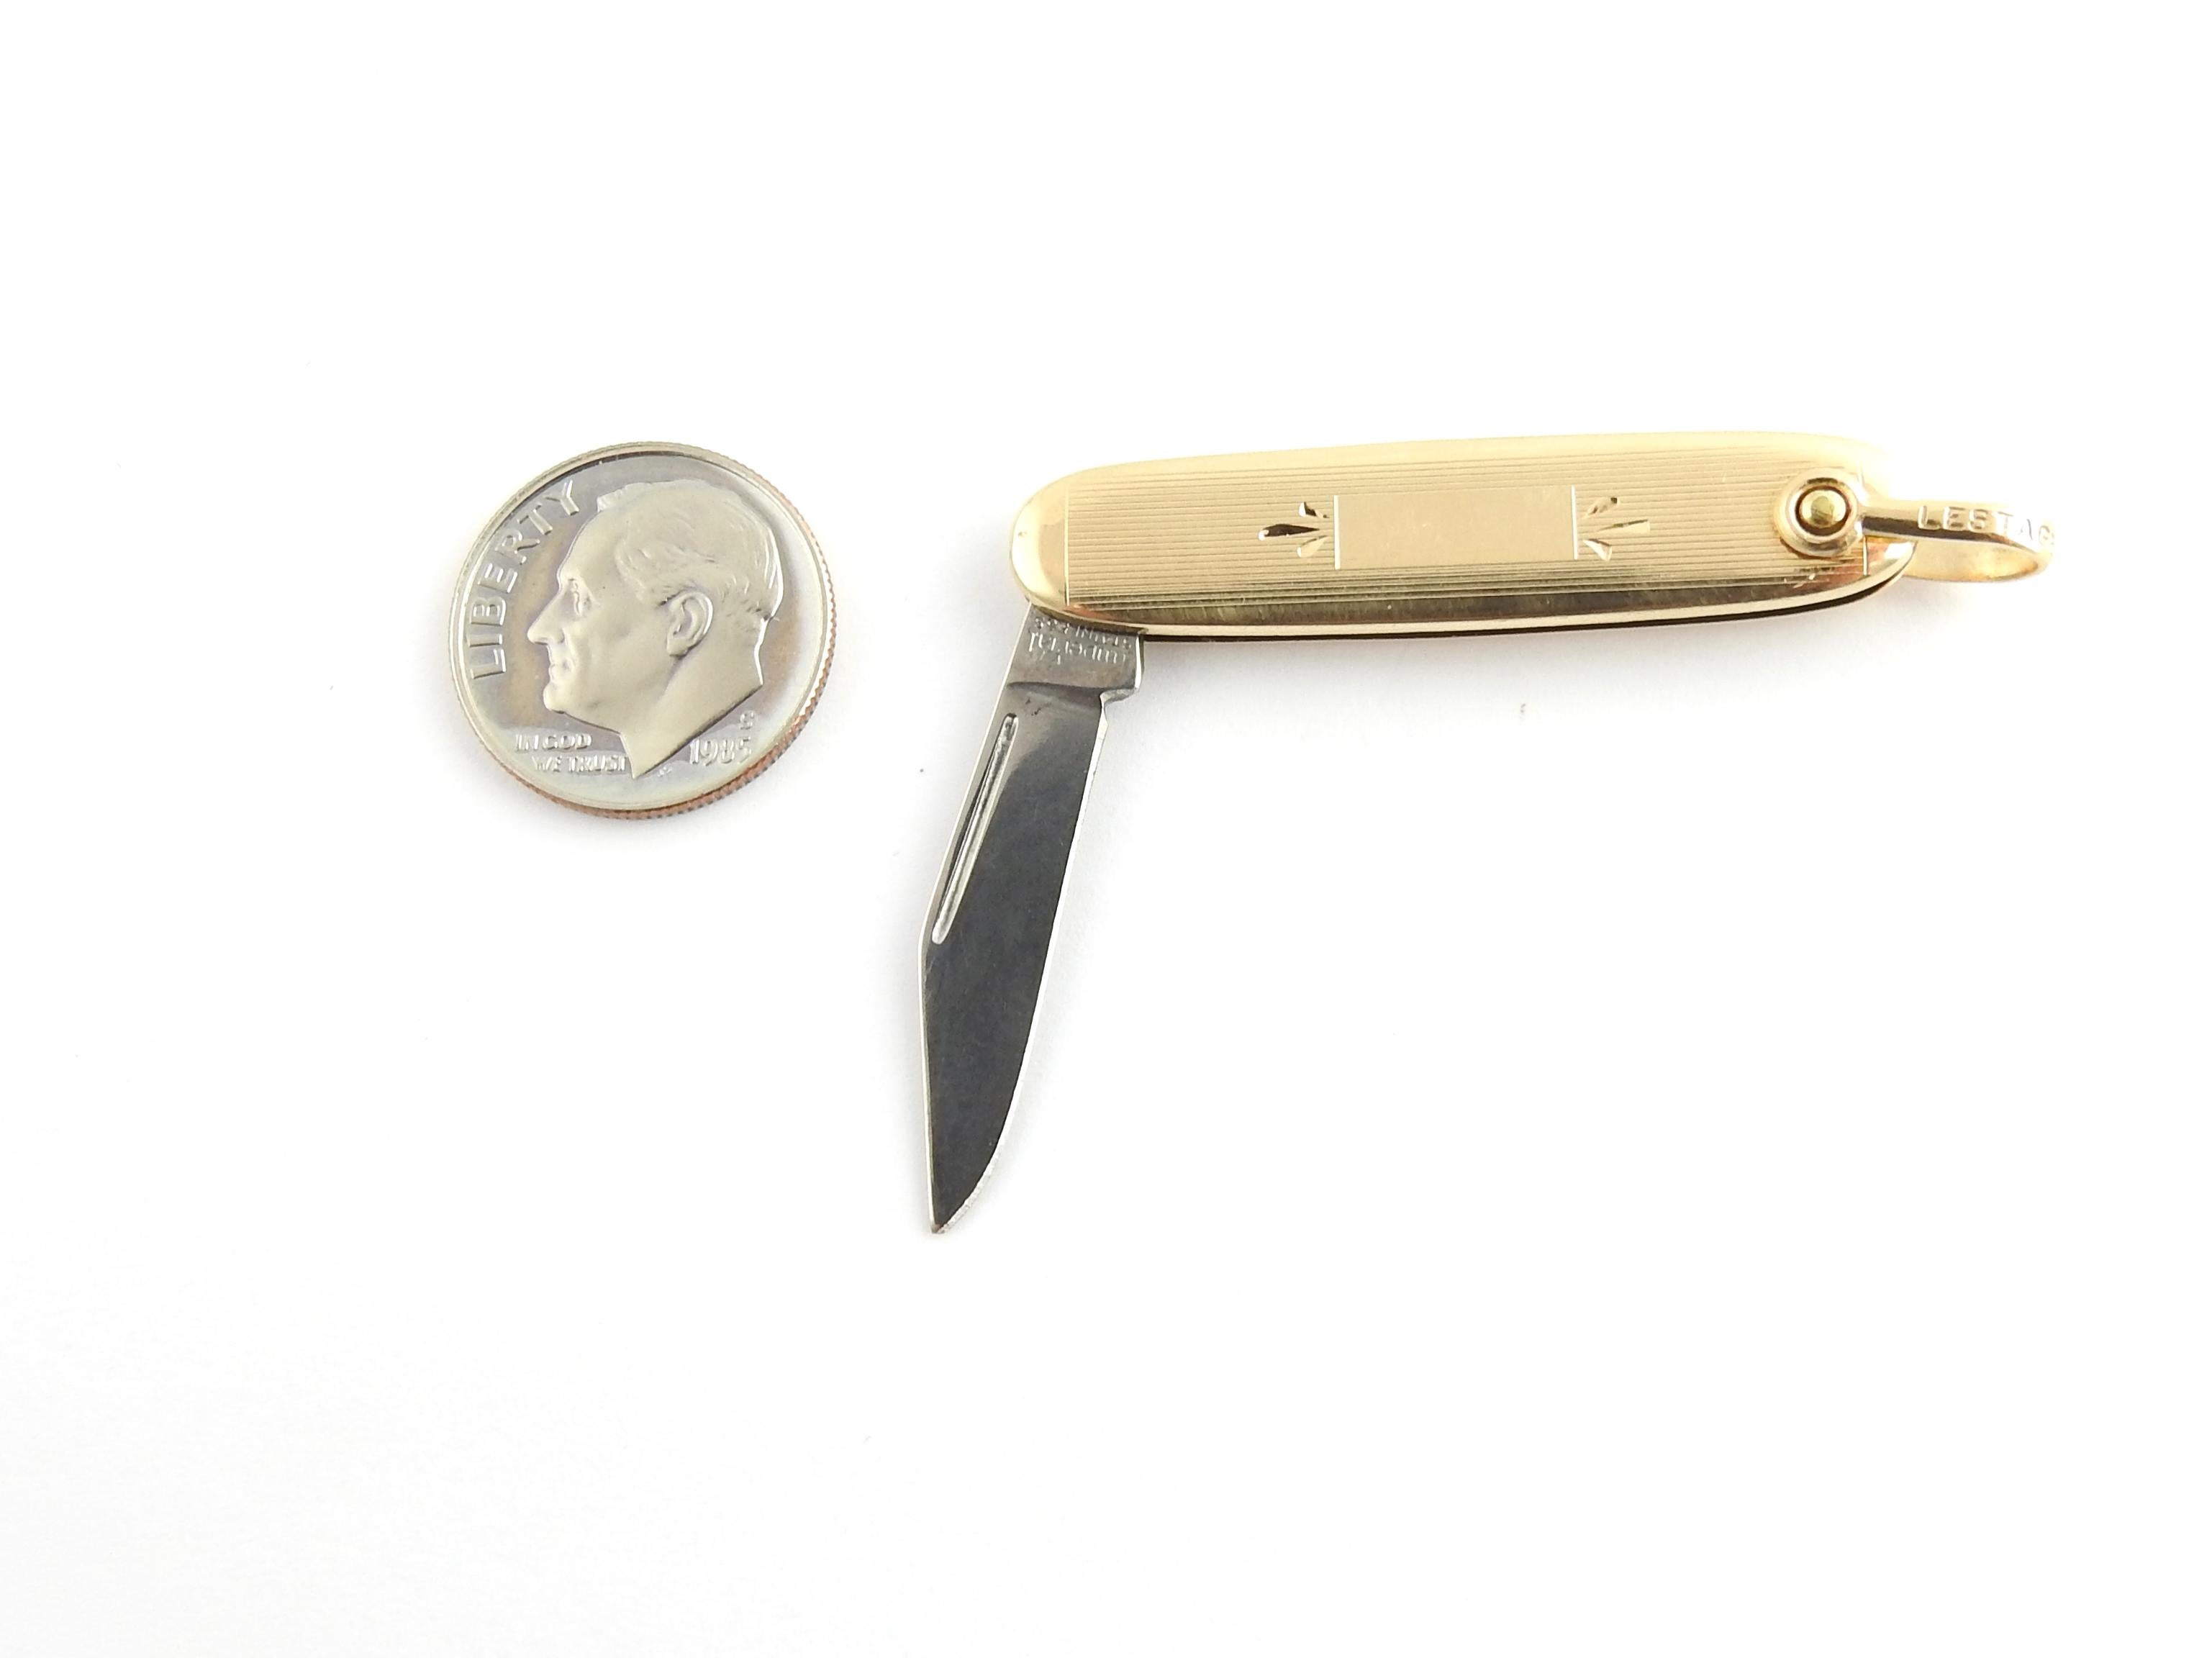 14 Karat Yellow Gold and Stainless Steel Pocket Knife 3